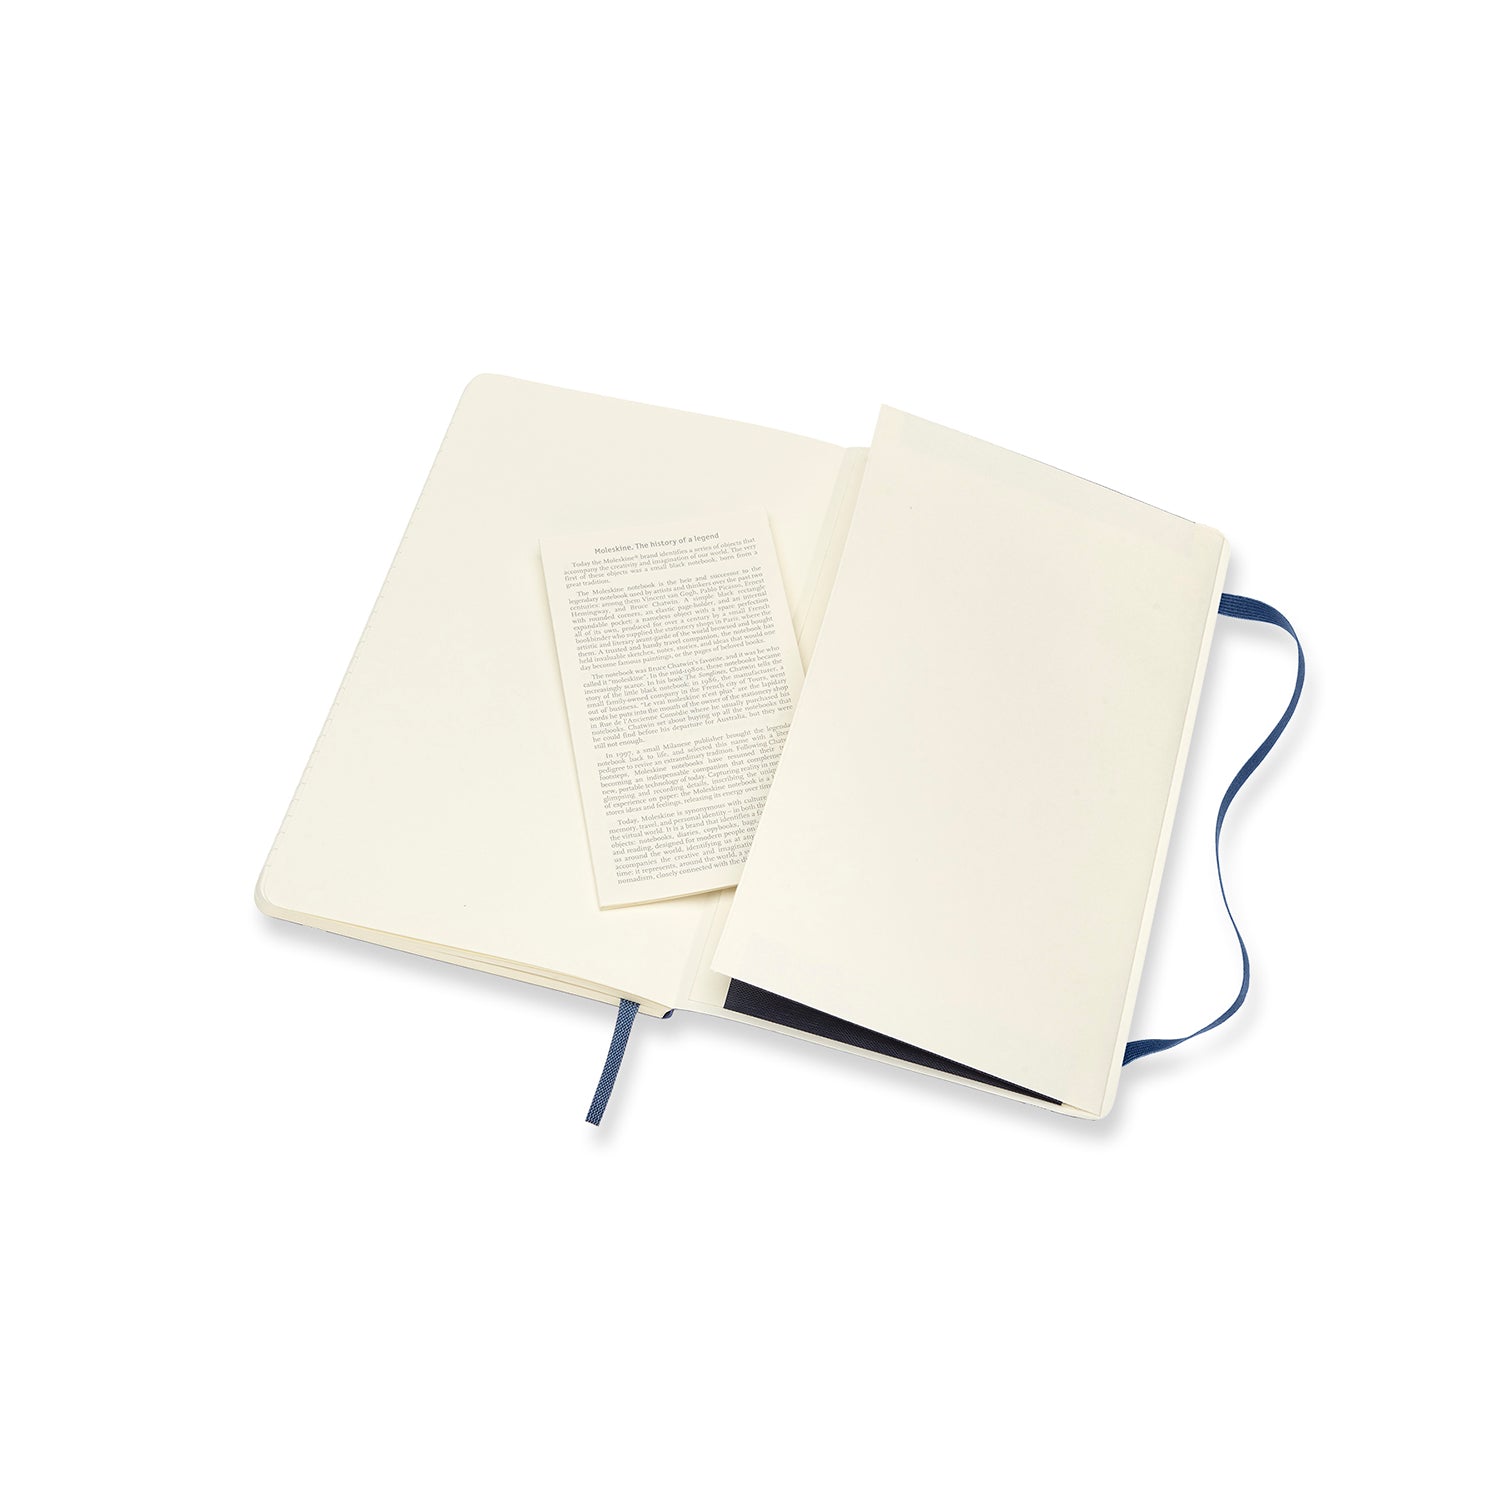 Moleskine notebook softcover large lined sapphire blue